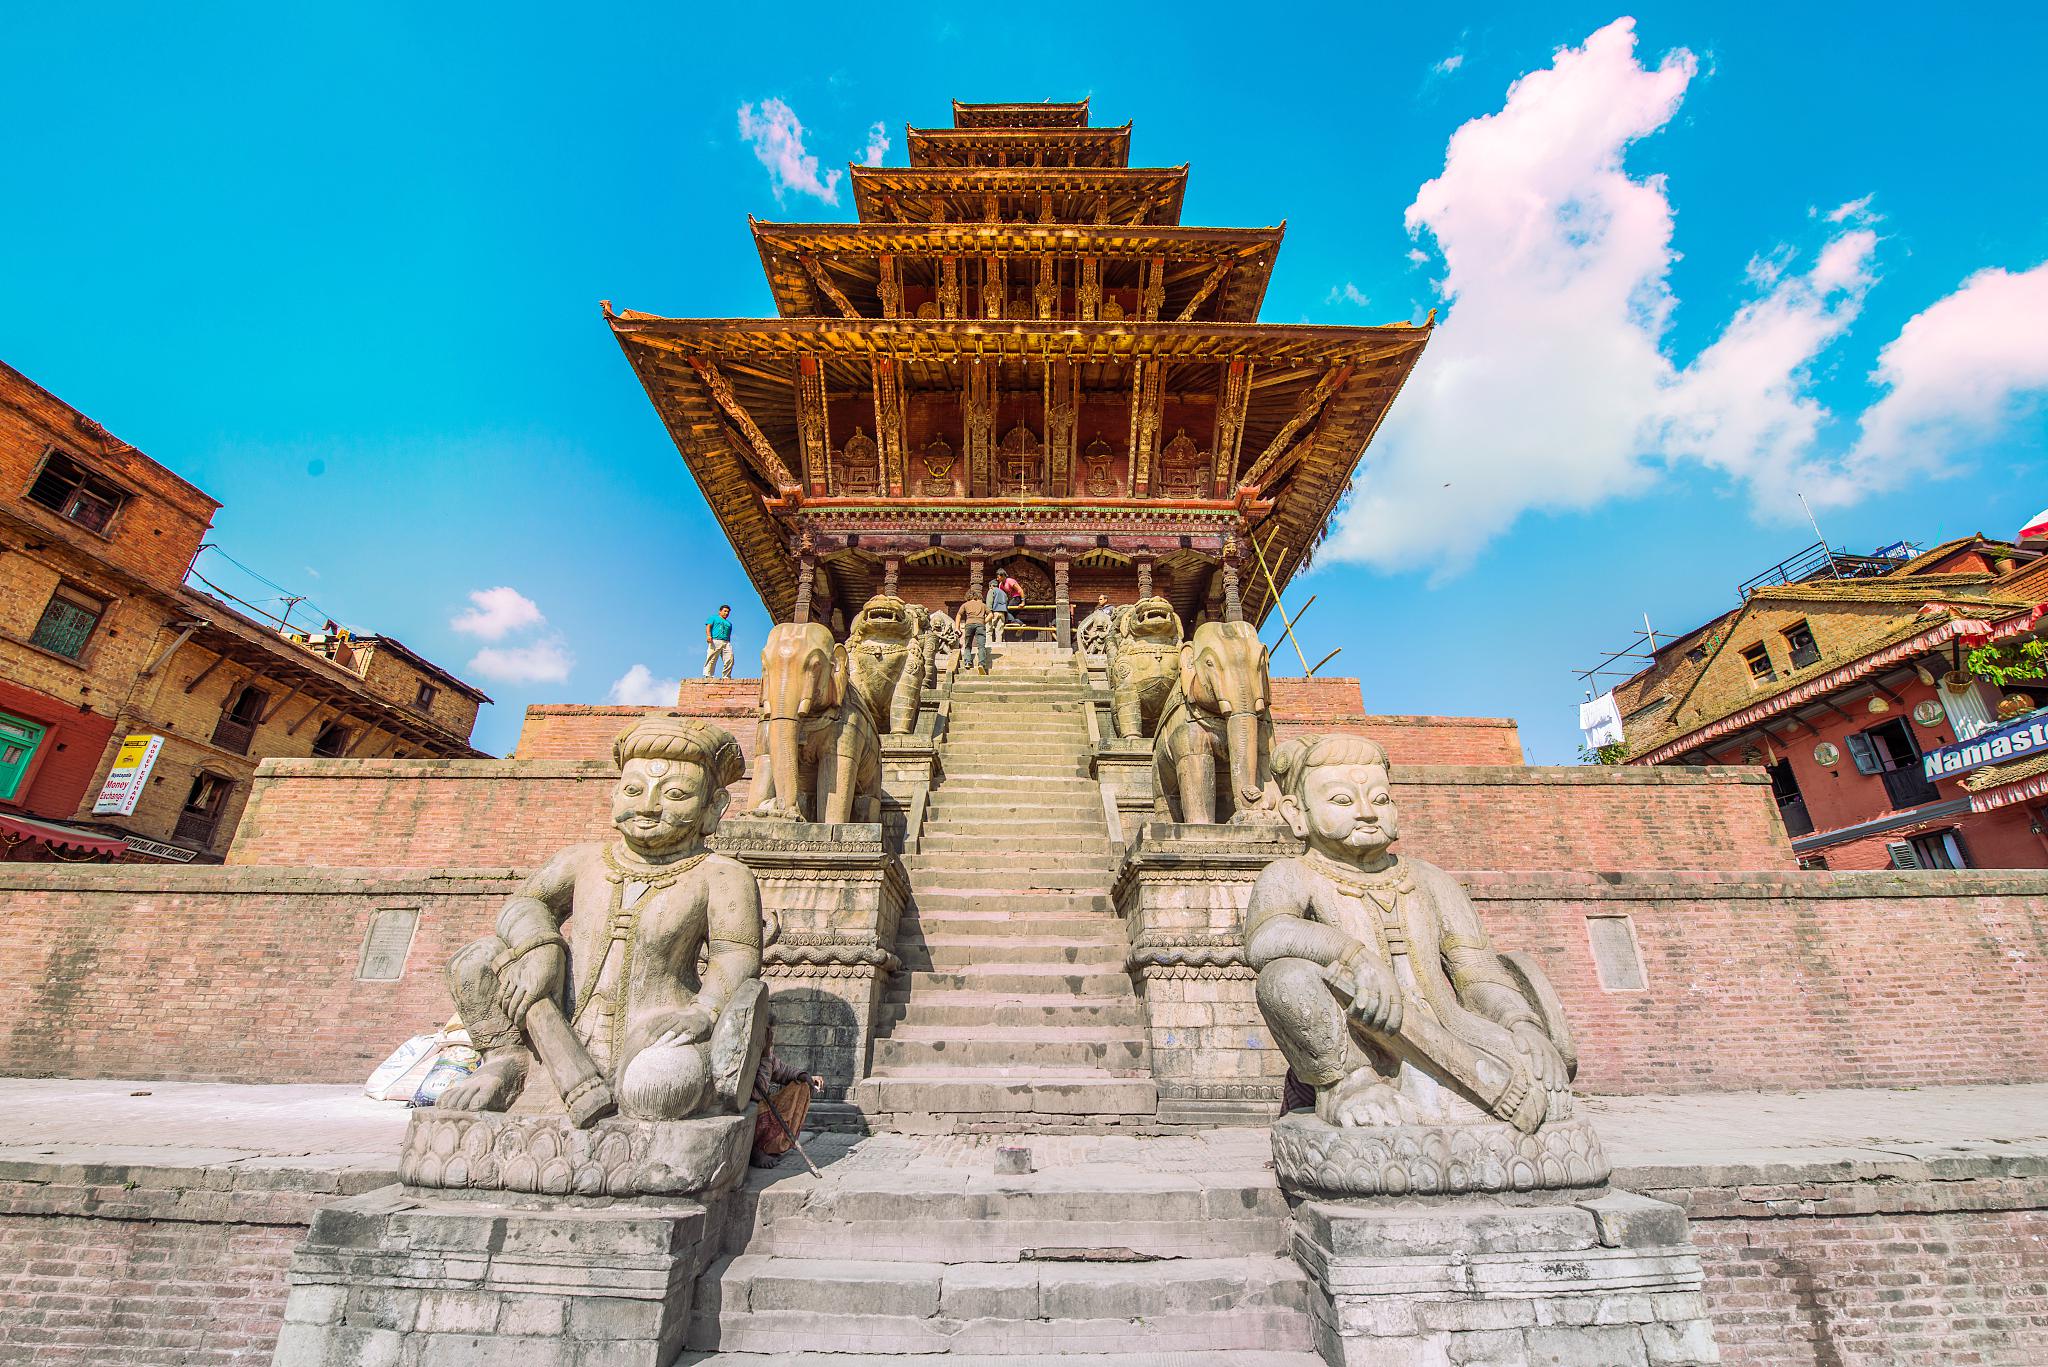 Bhaktapur Durbar Square attraction reviews - Bhaktapur Durbar Square tickets - Bhaktapur Durbar Square discounts - Bhaktapur Durbar Square transportation, address, opening hours - attractions, hotels, and food near Bhaktapur Durbar Square - Trip.com